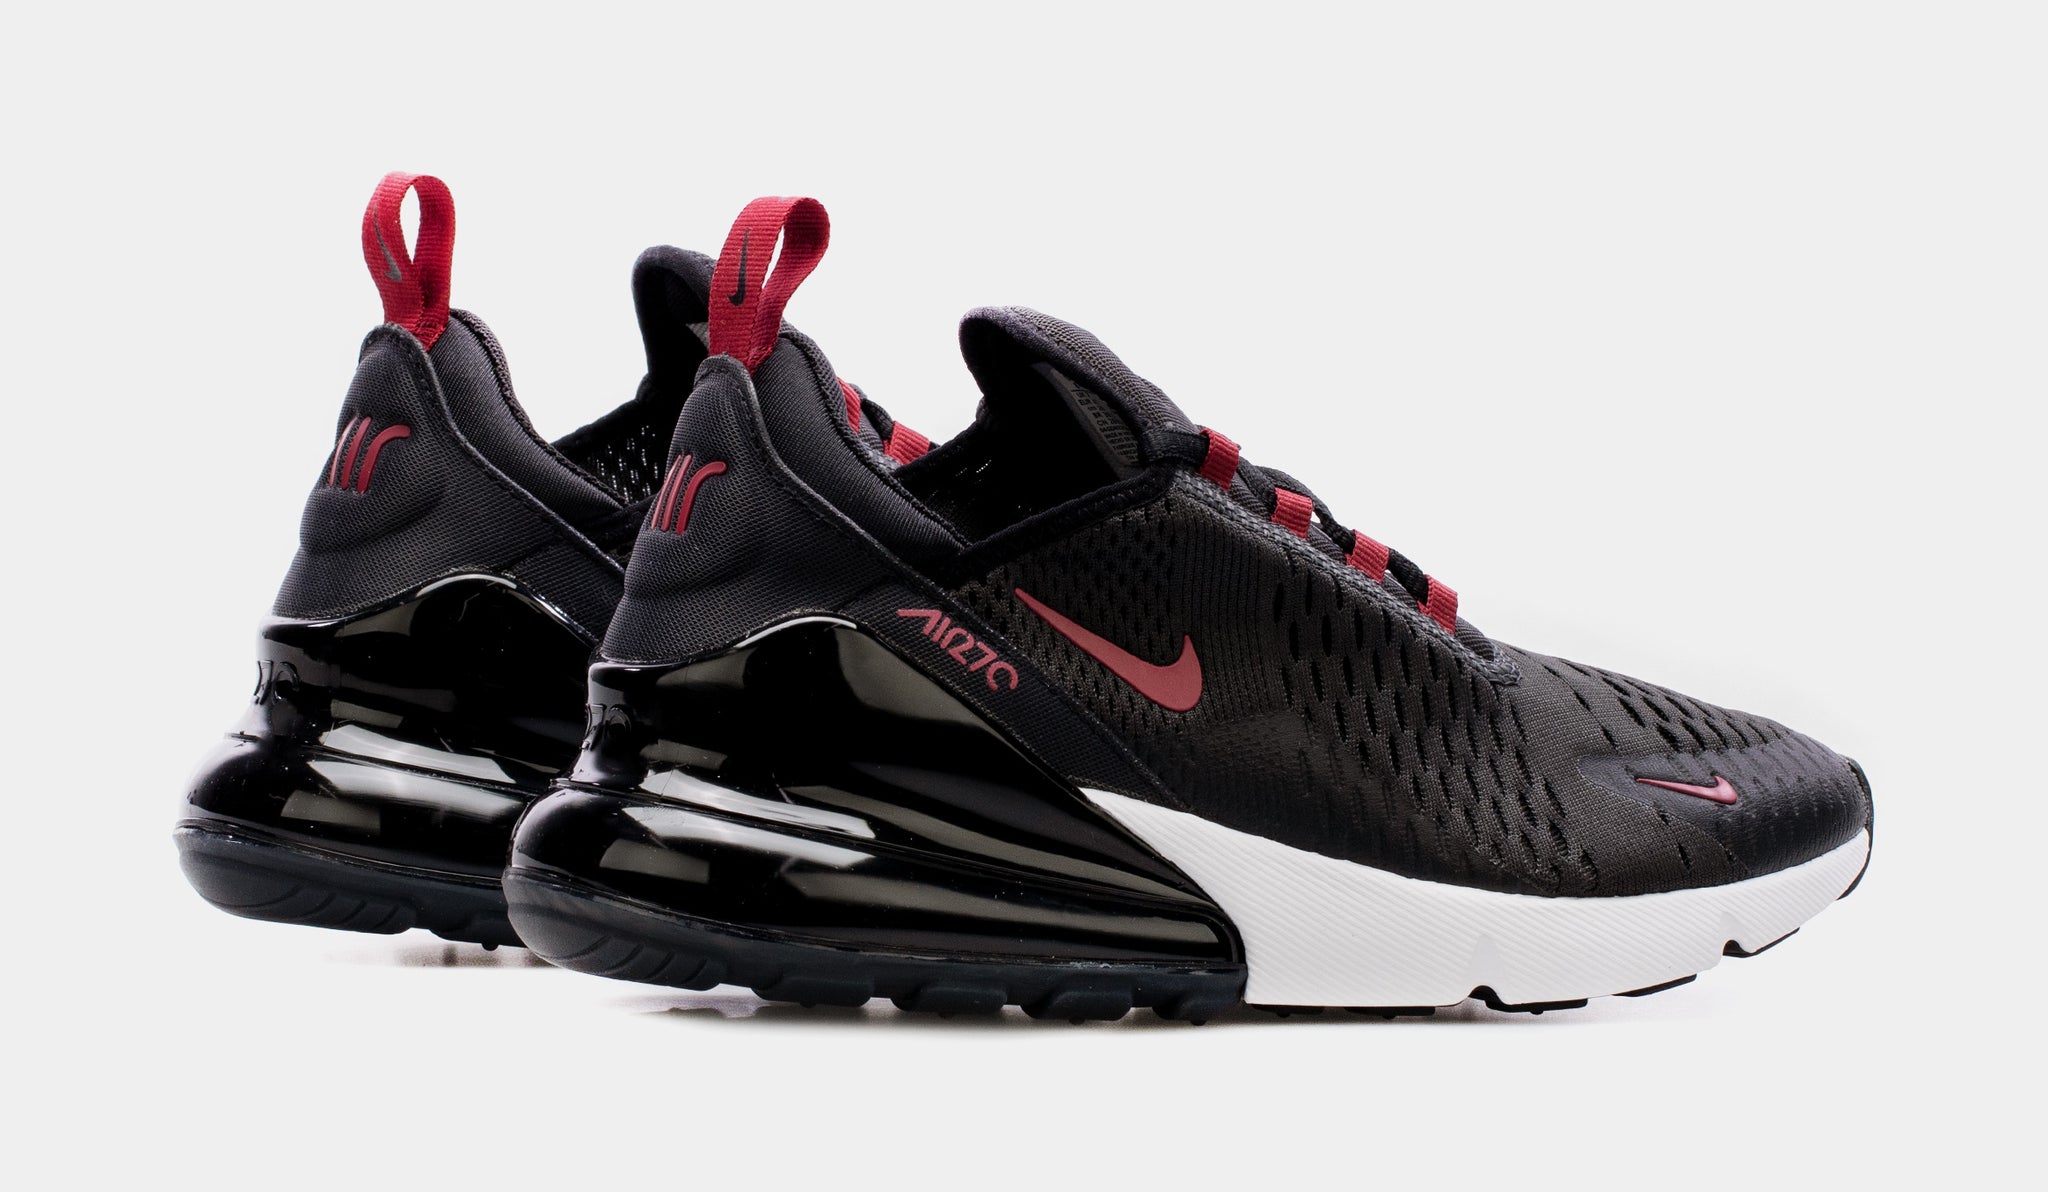 Nike Air Max 270 'Anthracite Team Red' | Black | Men's Size 10